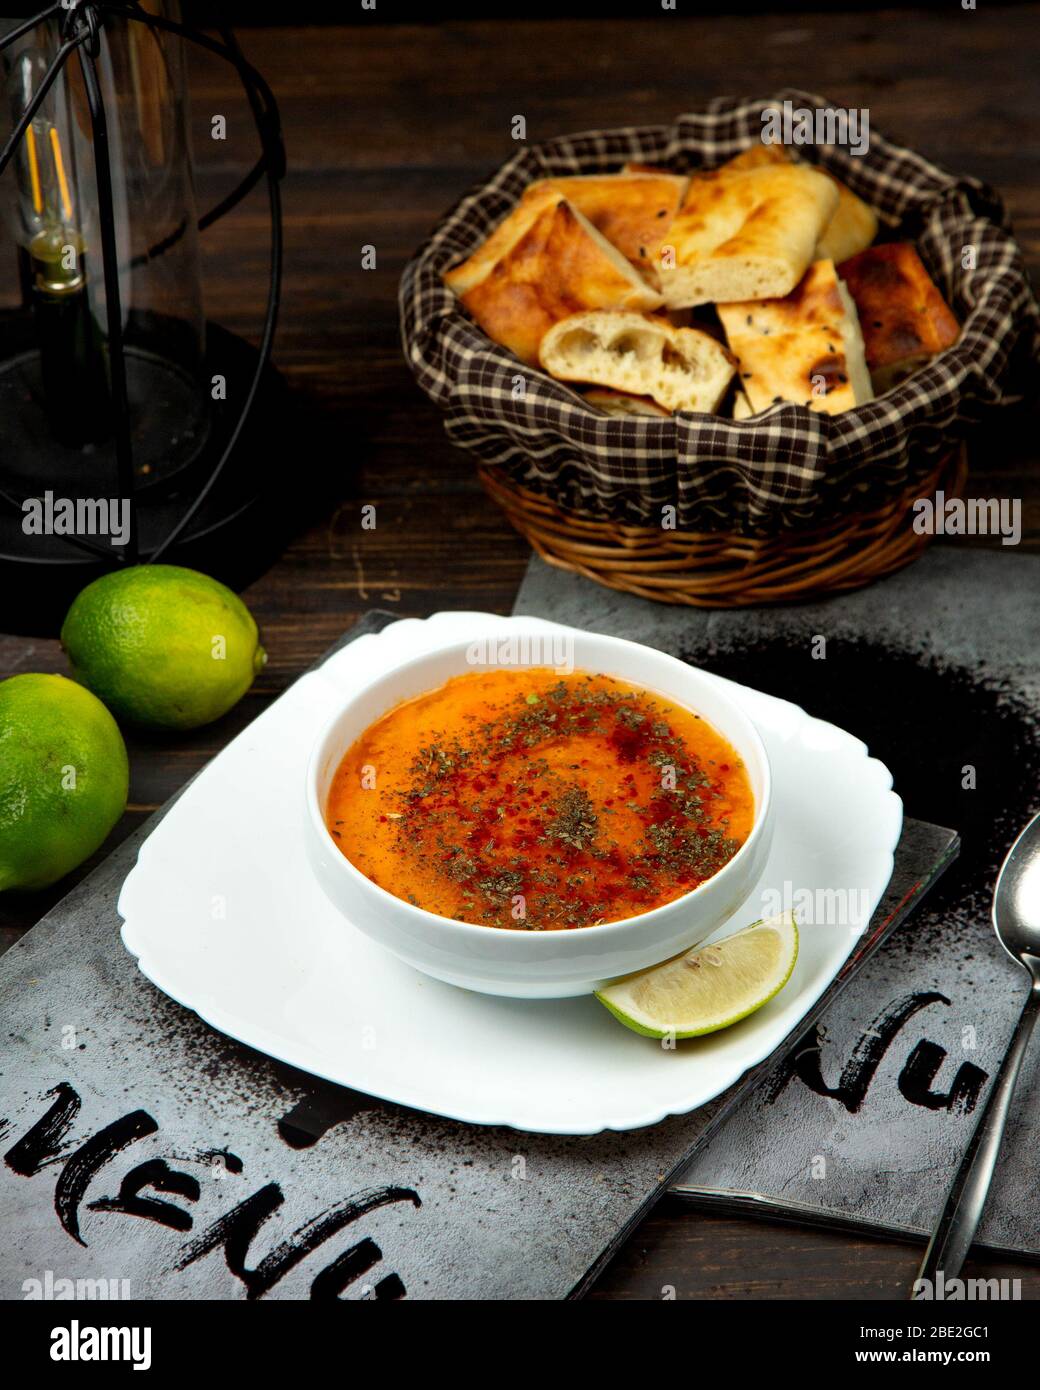 lentil soup sprinkled with spices and a slice of lemon Stock Photo